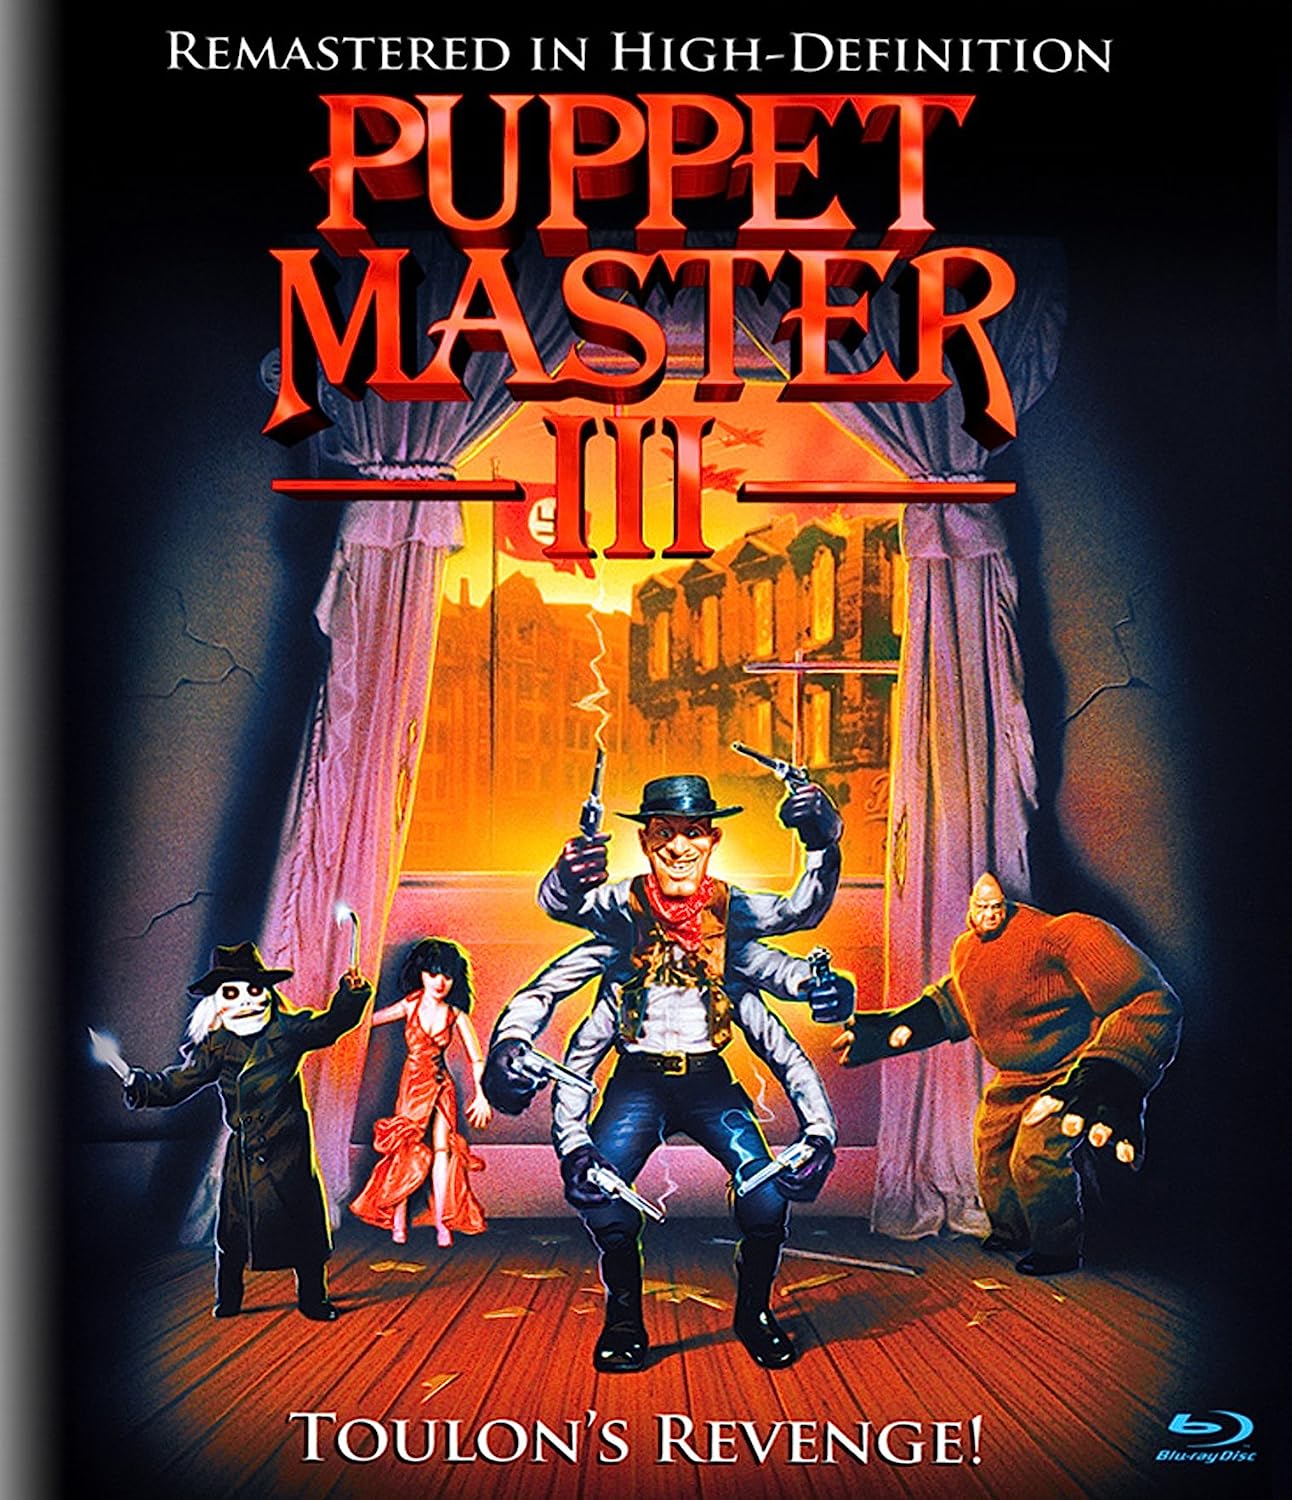 Puppet Master III (Full Moon Features) - Darkside Records